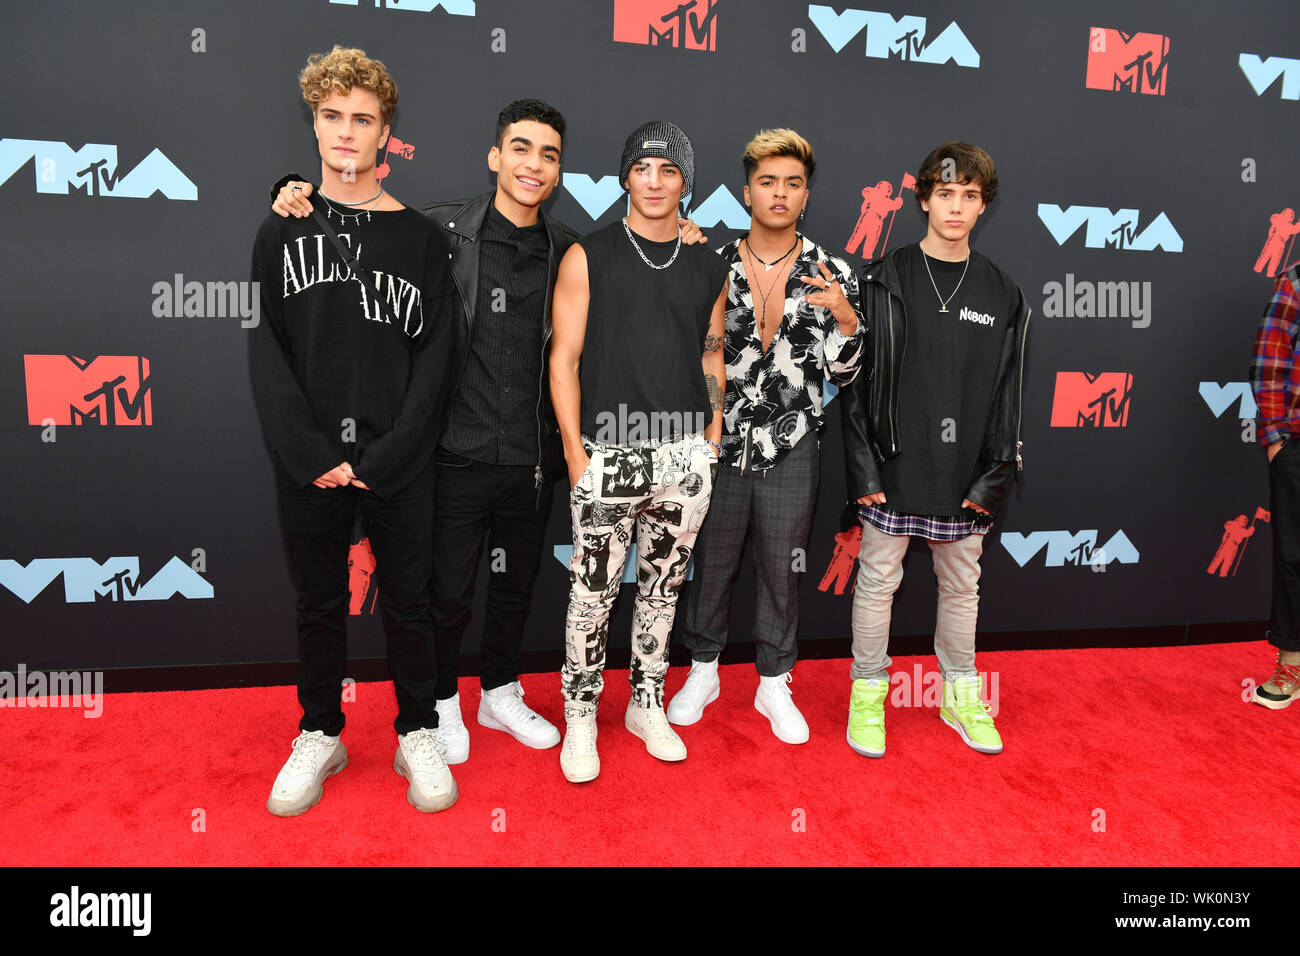 In Real Life - Brady Tutton, Chance Perez, Drew Ramos, Sergio Calderon, and Conor Smith attend the 2019 MTV Video Music Awards at Prudential Center on Stock Photo